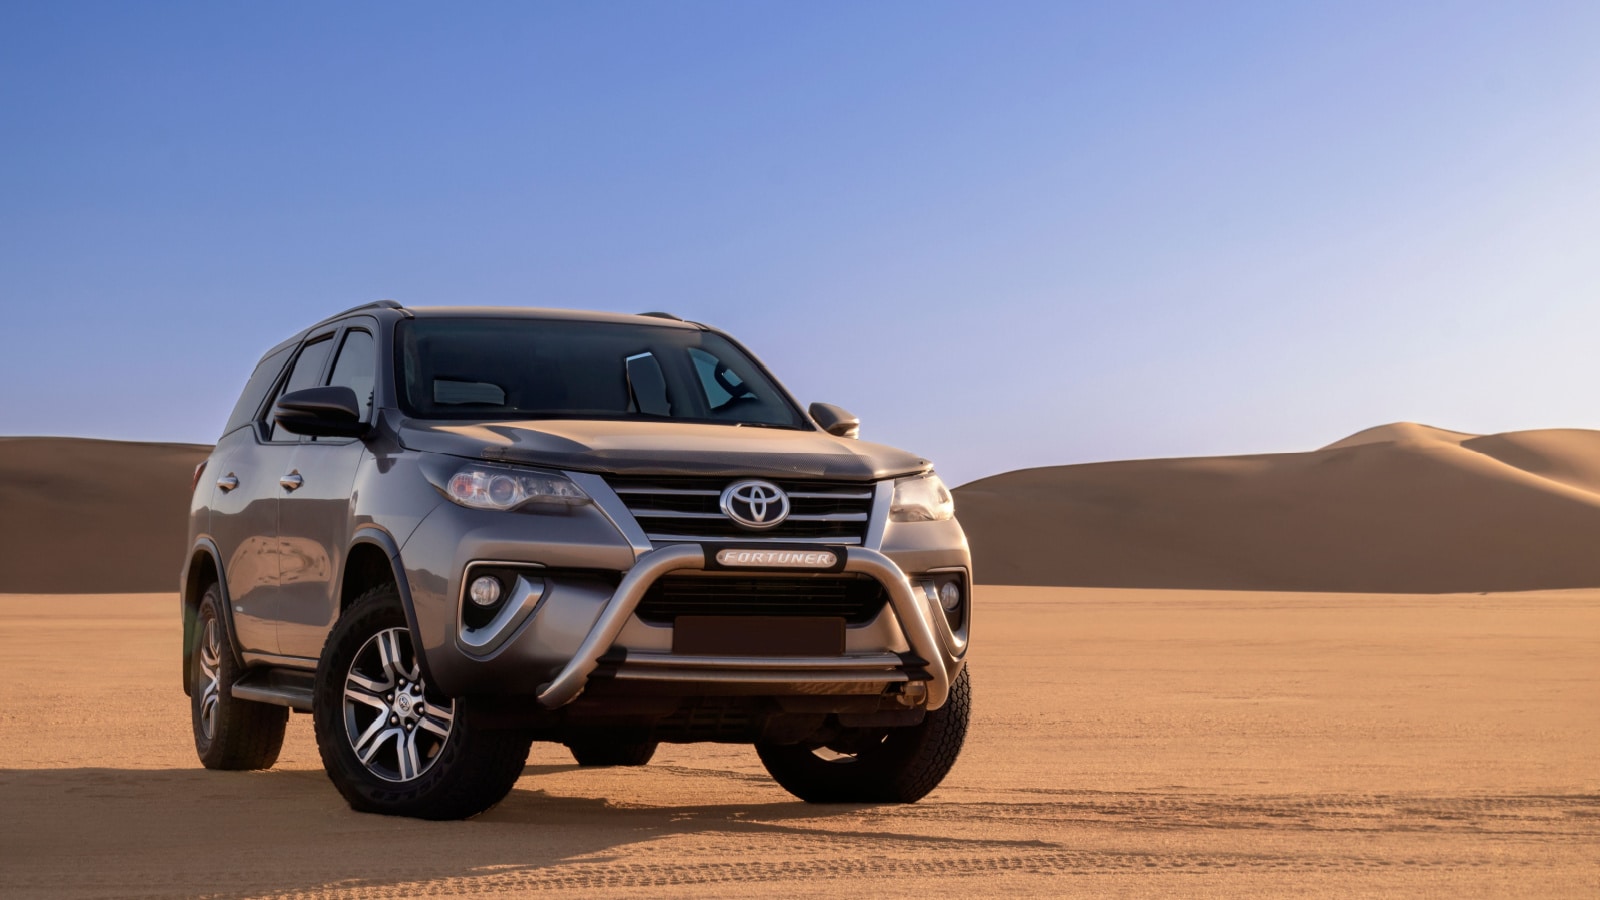 Toyota Fortuner standing in the middle of the Namib desert on a sunny day. 24.07.2021. Namibia, Africa